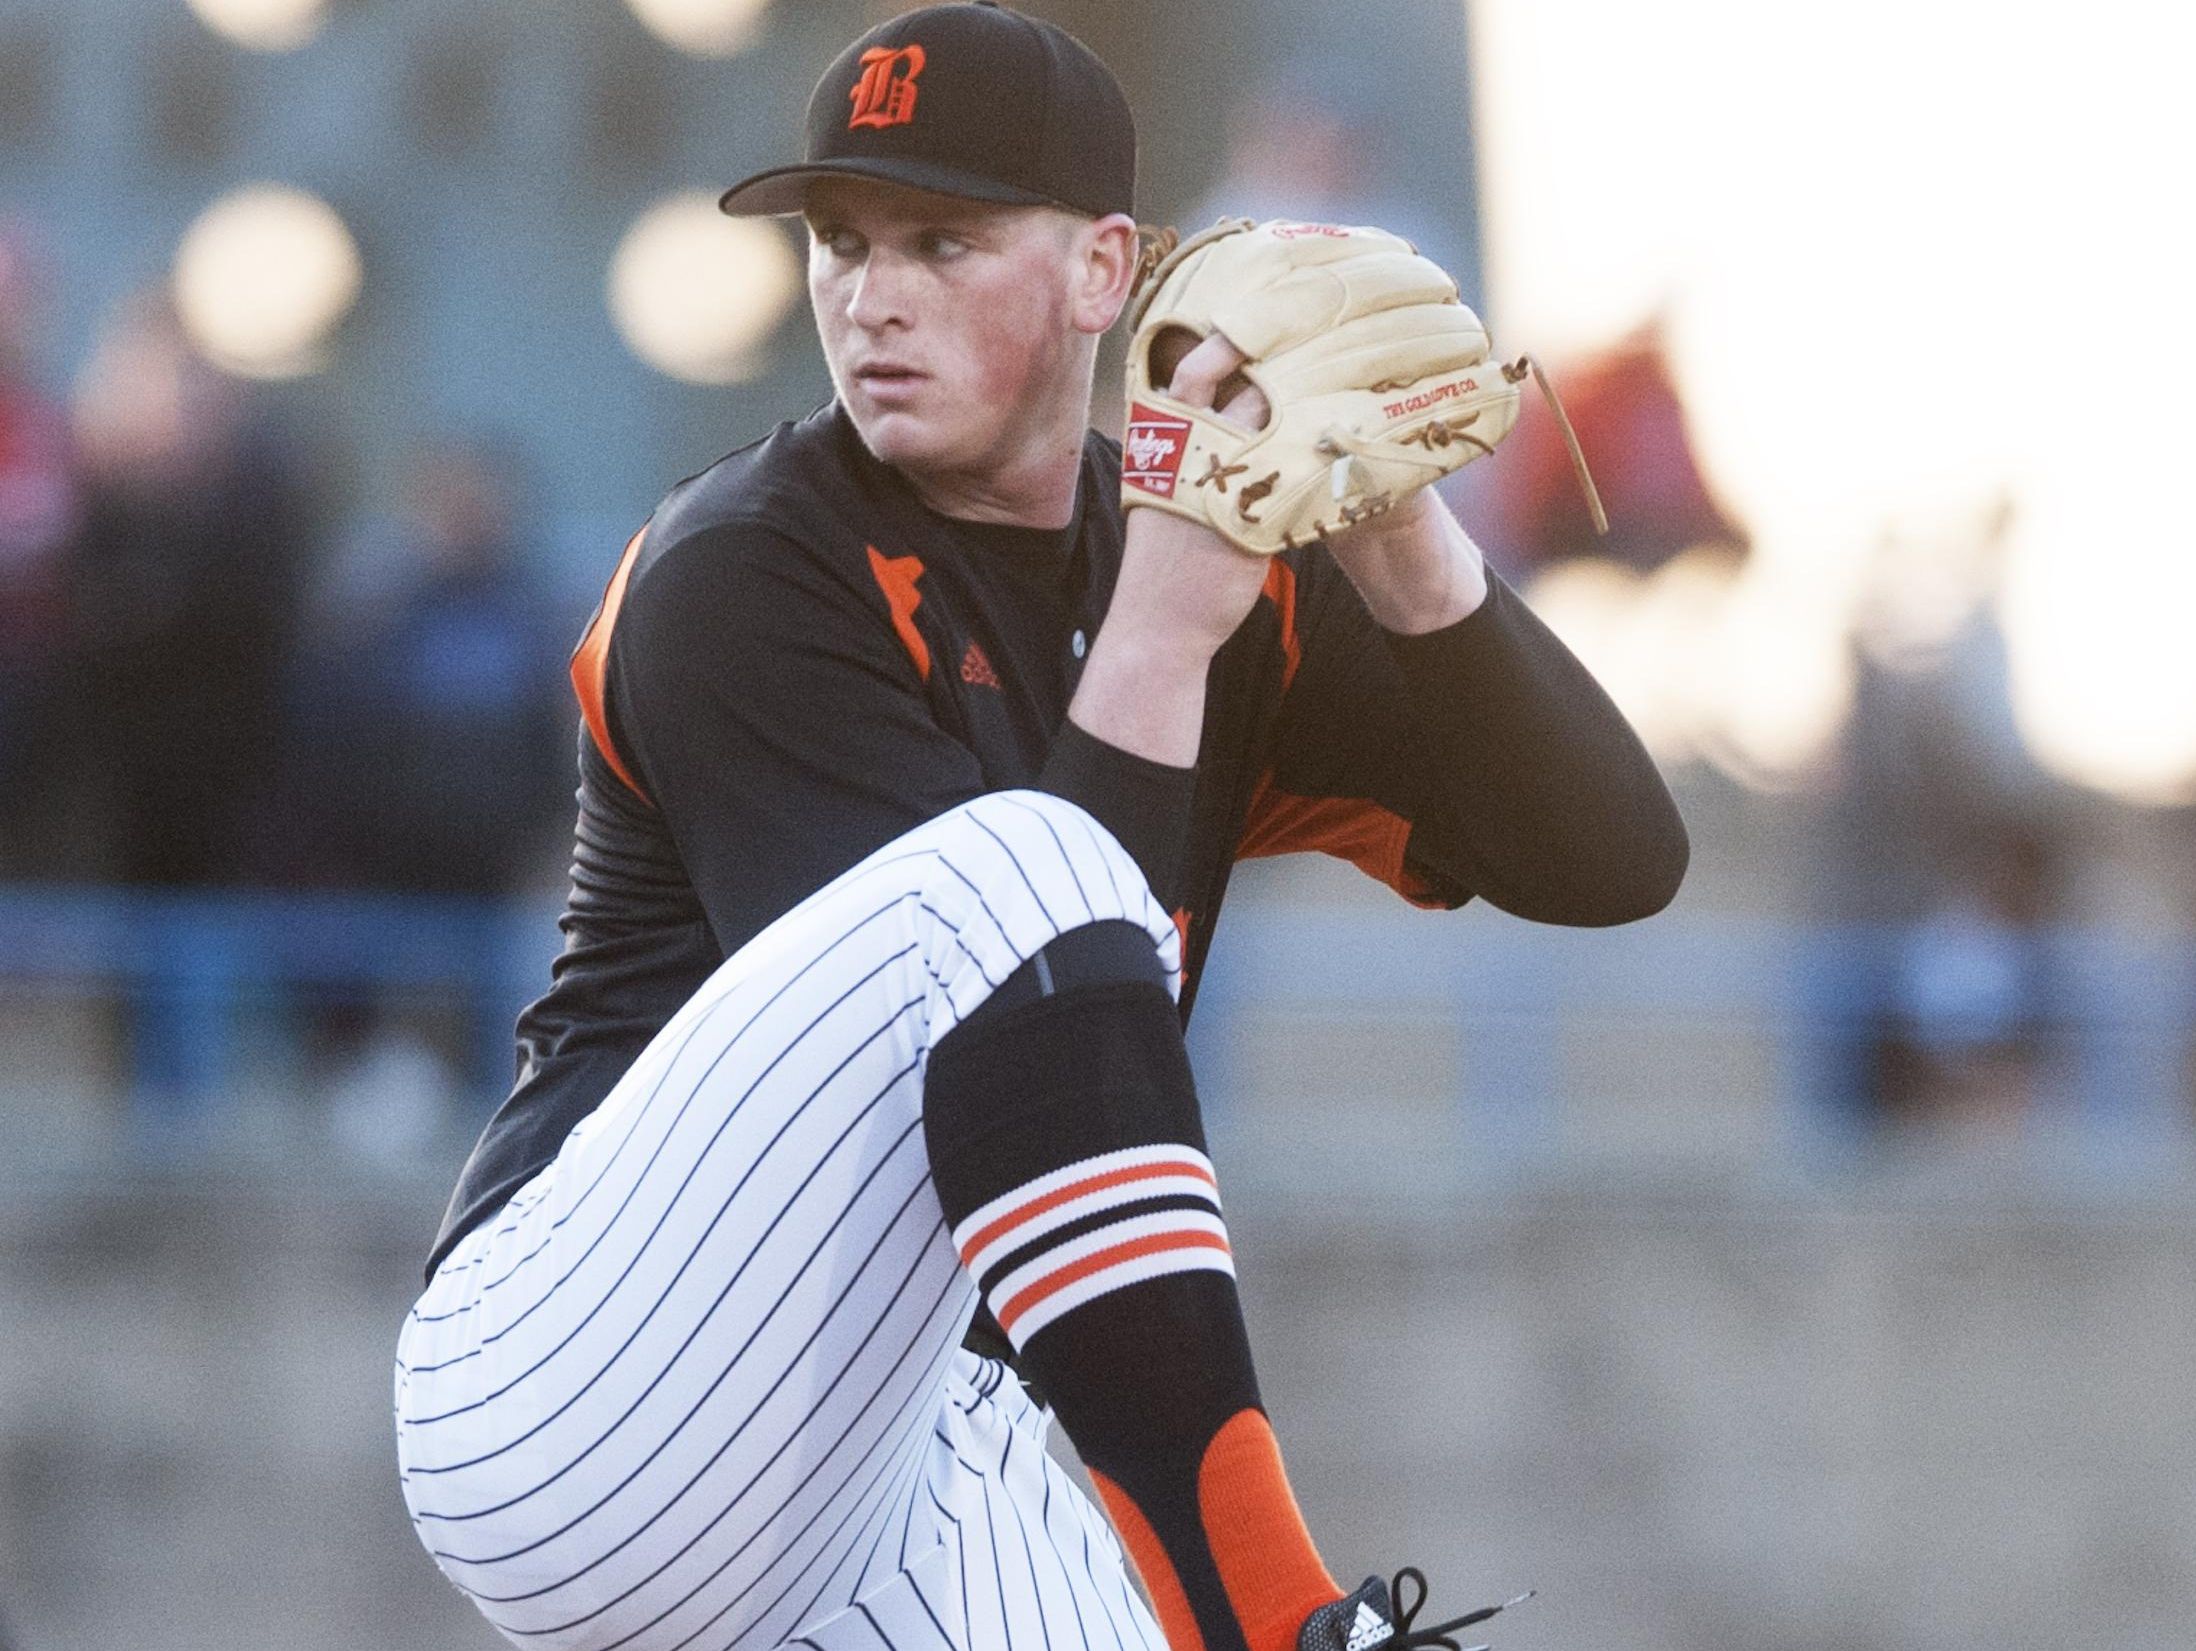 Barnegat's Jason Groome delivers a pitch during the 3rd inning of Mondays baseball game between Barnegat and Gloucester Catholic played at Campbell's Field in Camden. 05.16,16